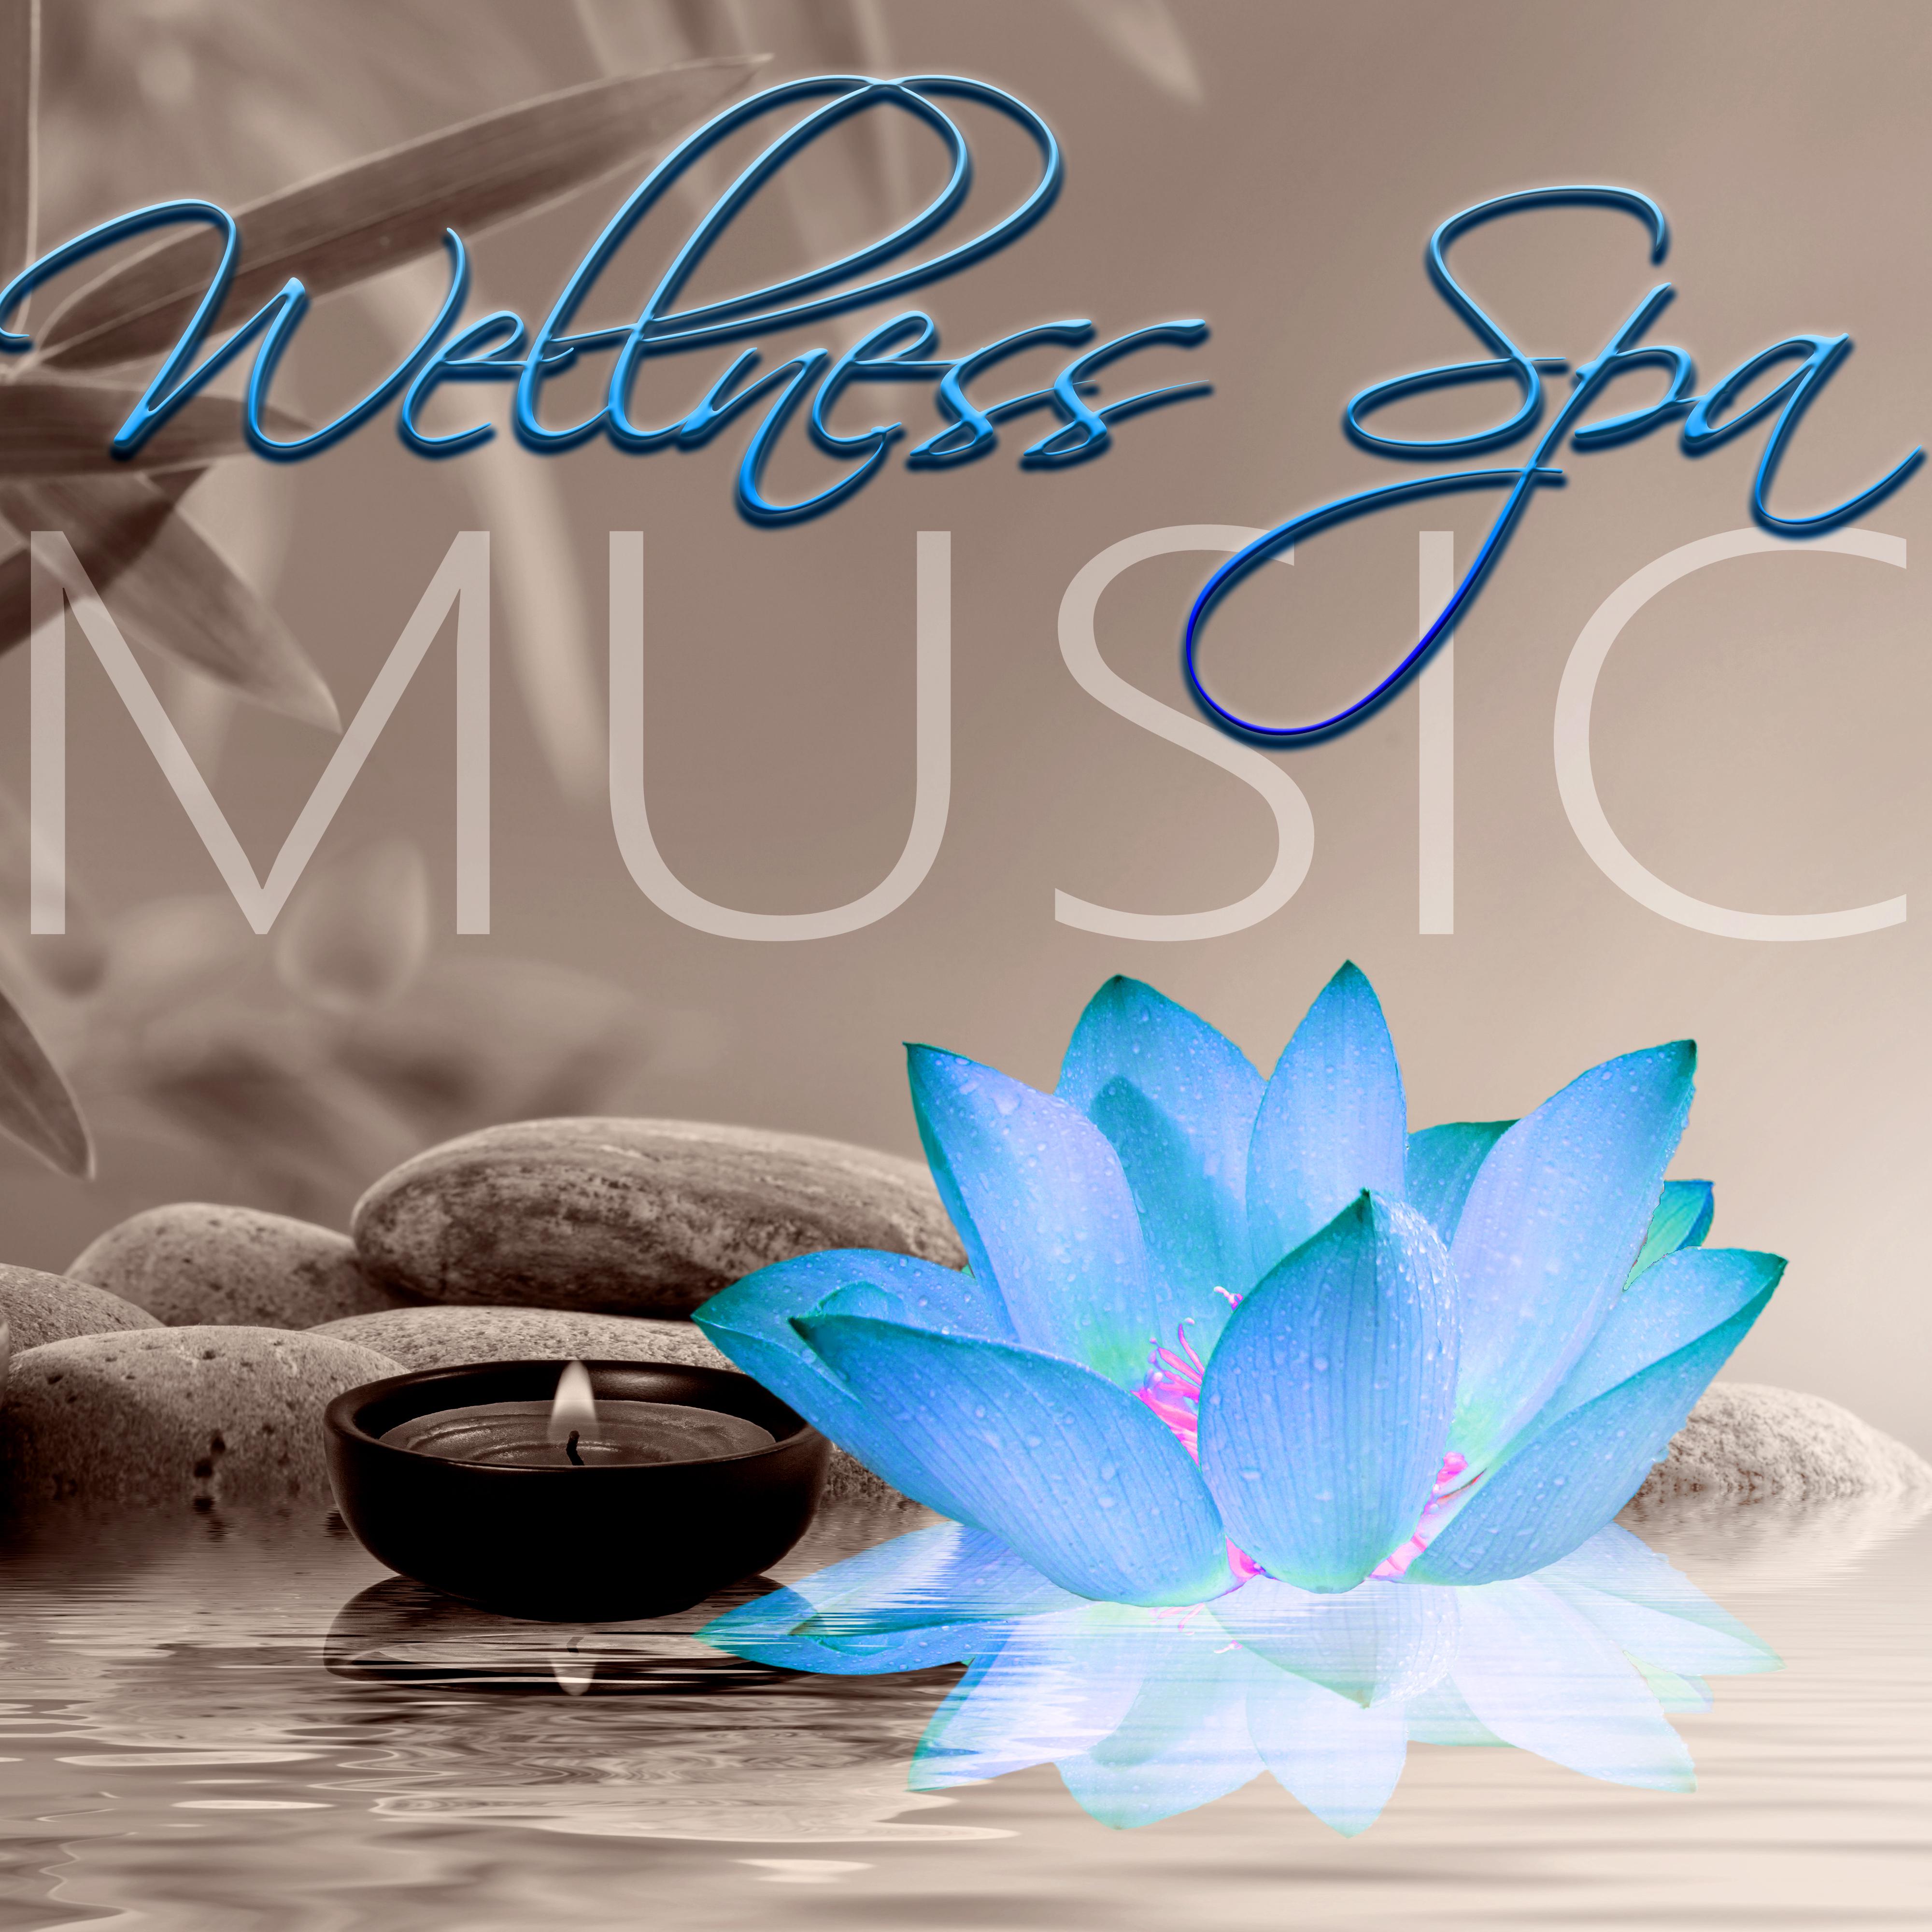 Wellness Spa Music - Beauty Center Calming Background Ambient Collection, Serenity Spa Music, Day Spa, Home Spa, Zen Spa, Health Spa, Relaxation Meditation, Massage